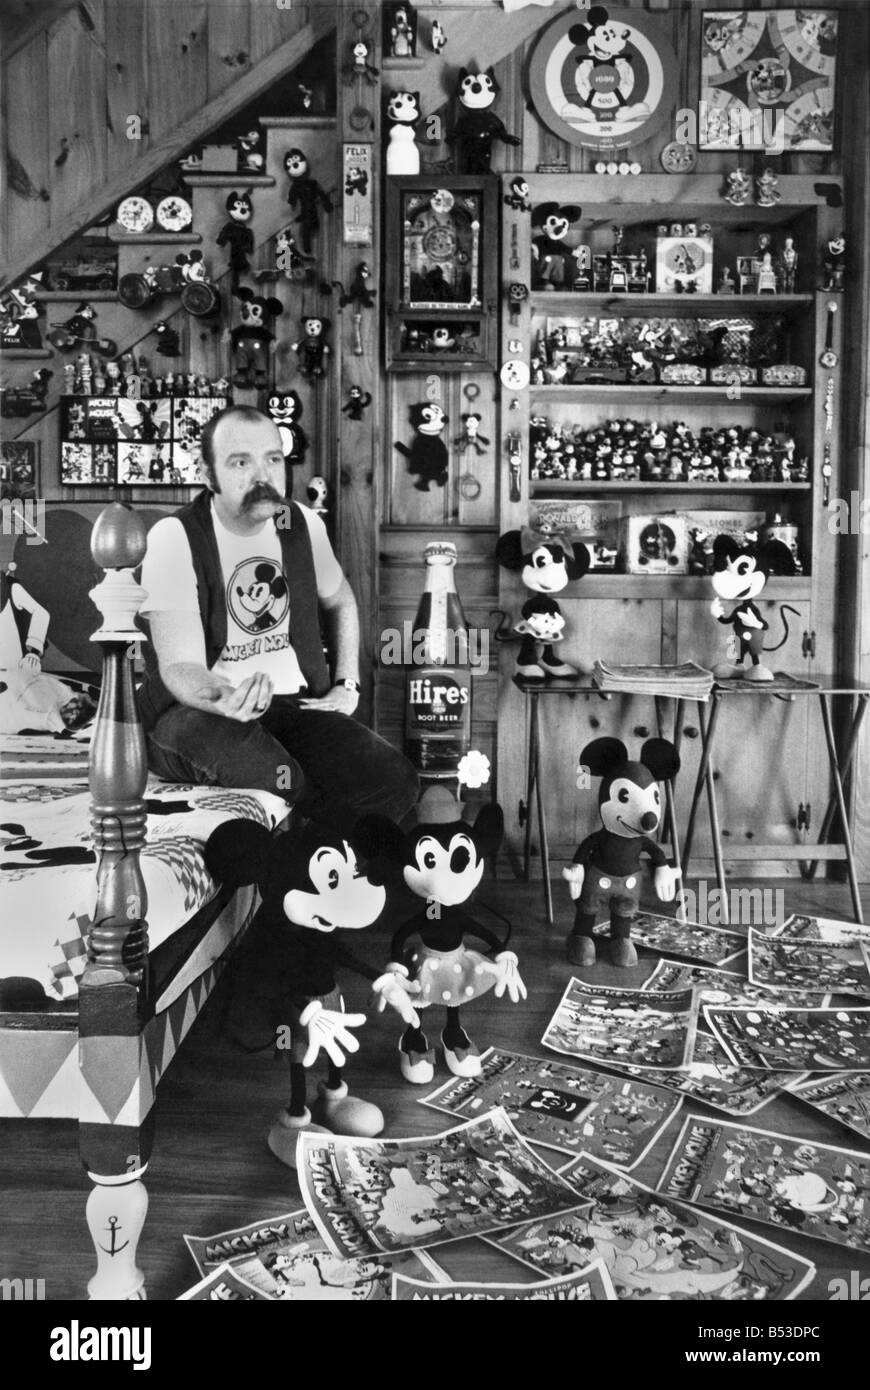 Collections. Mickey Mouse mania. ;Assistant Professor John Fawcett at his home - surrounded by Mickey Mouse in many shapes and forms. ;Disney, toys, bed cover, posters, magazines. ;March 1970 P017783 Stock Photo